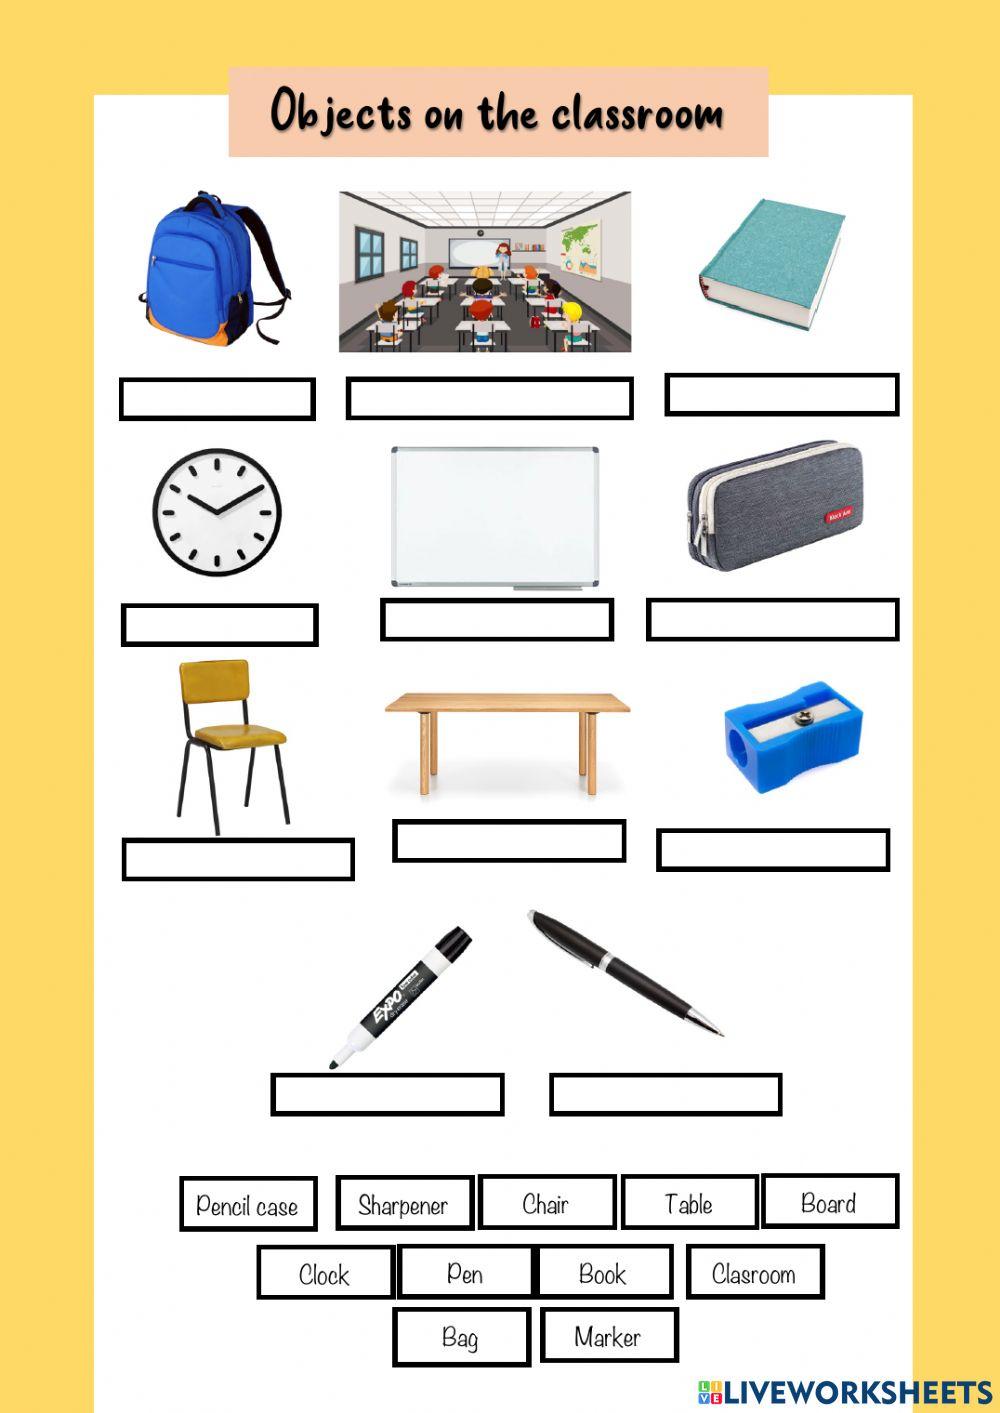 Objects on the classroom